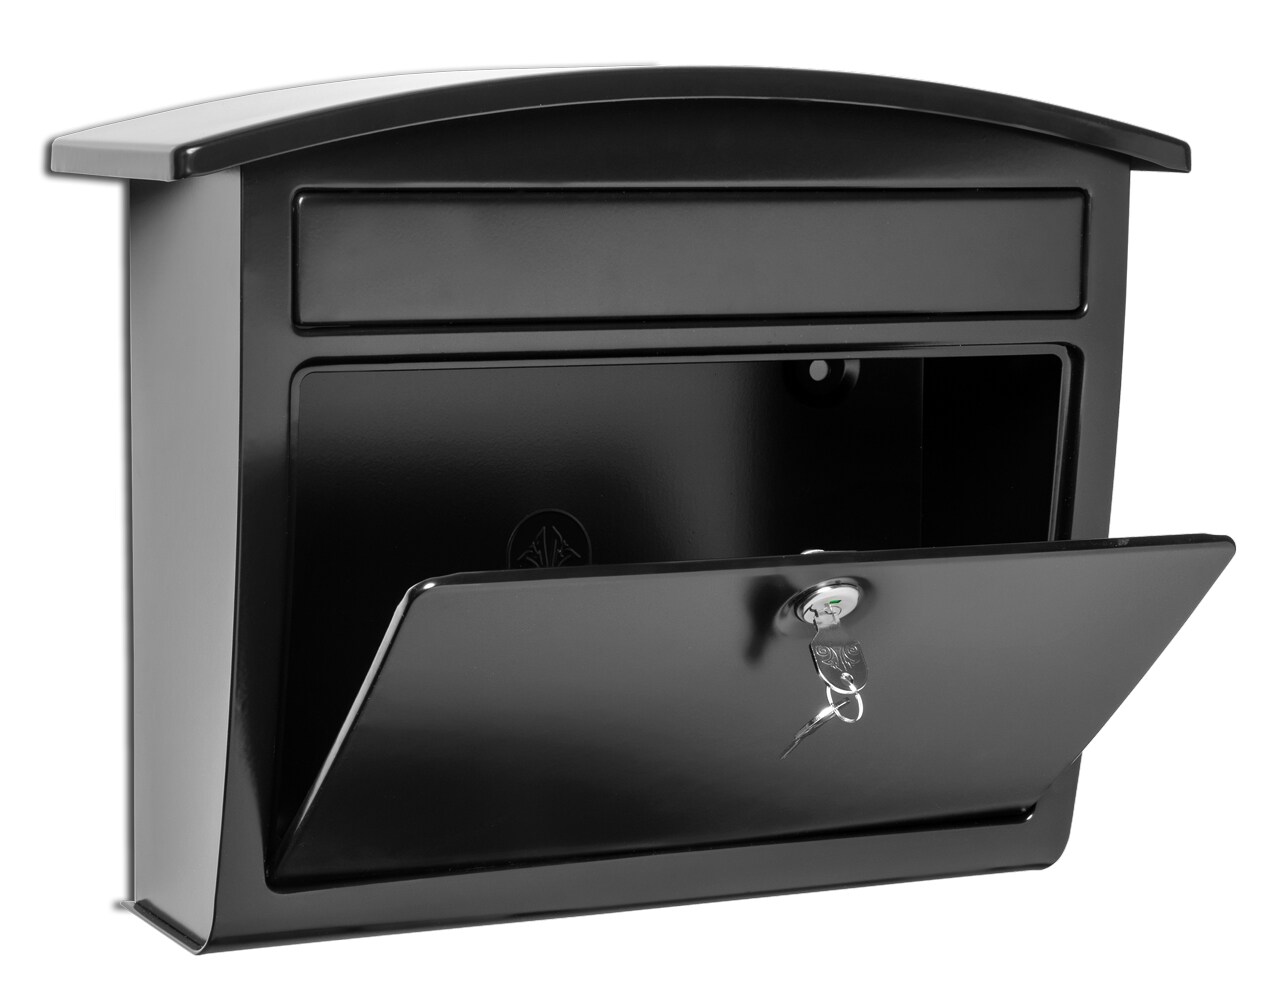 zhenMailbox Mailbox Wall-Mounted Mailbox with Key Lock Mailbox Steel Lockable Mailbox for Outdoor School Office Family-Black